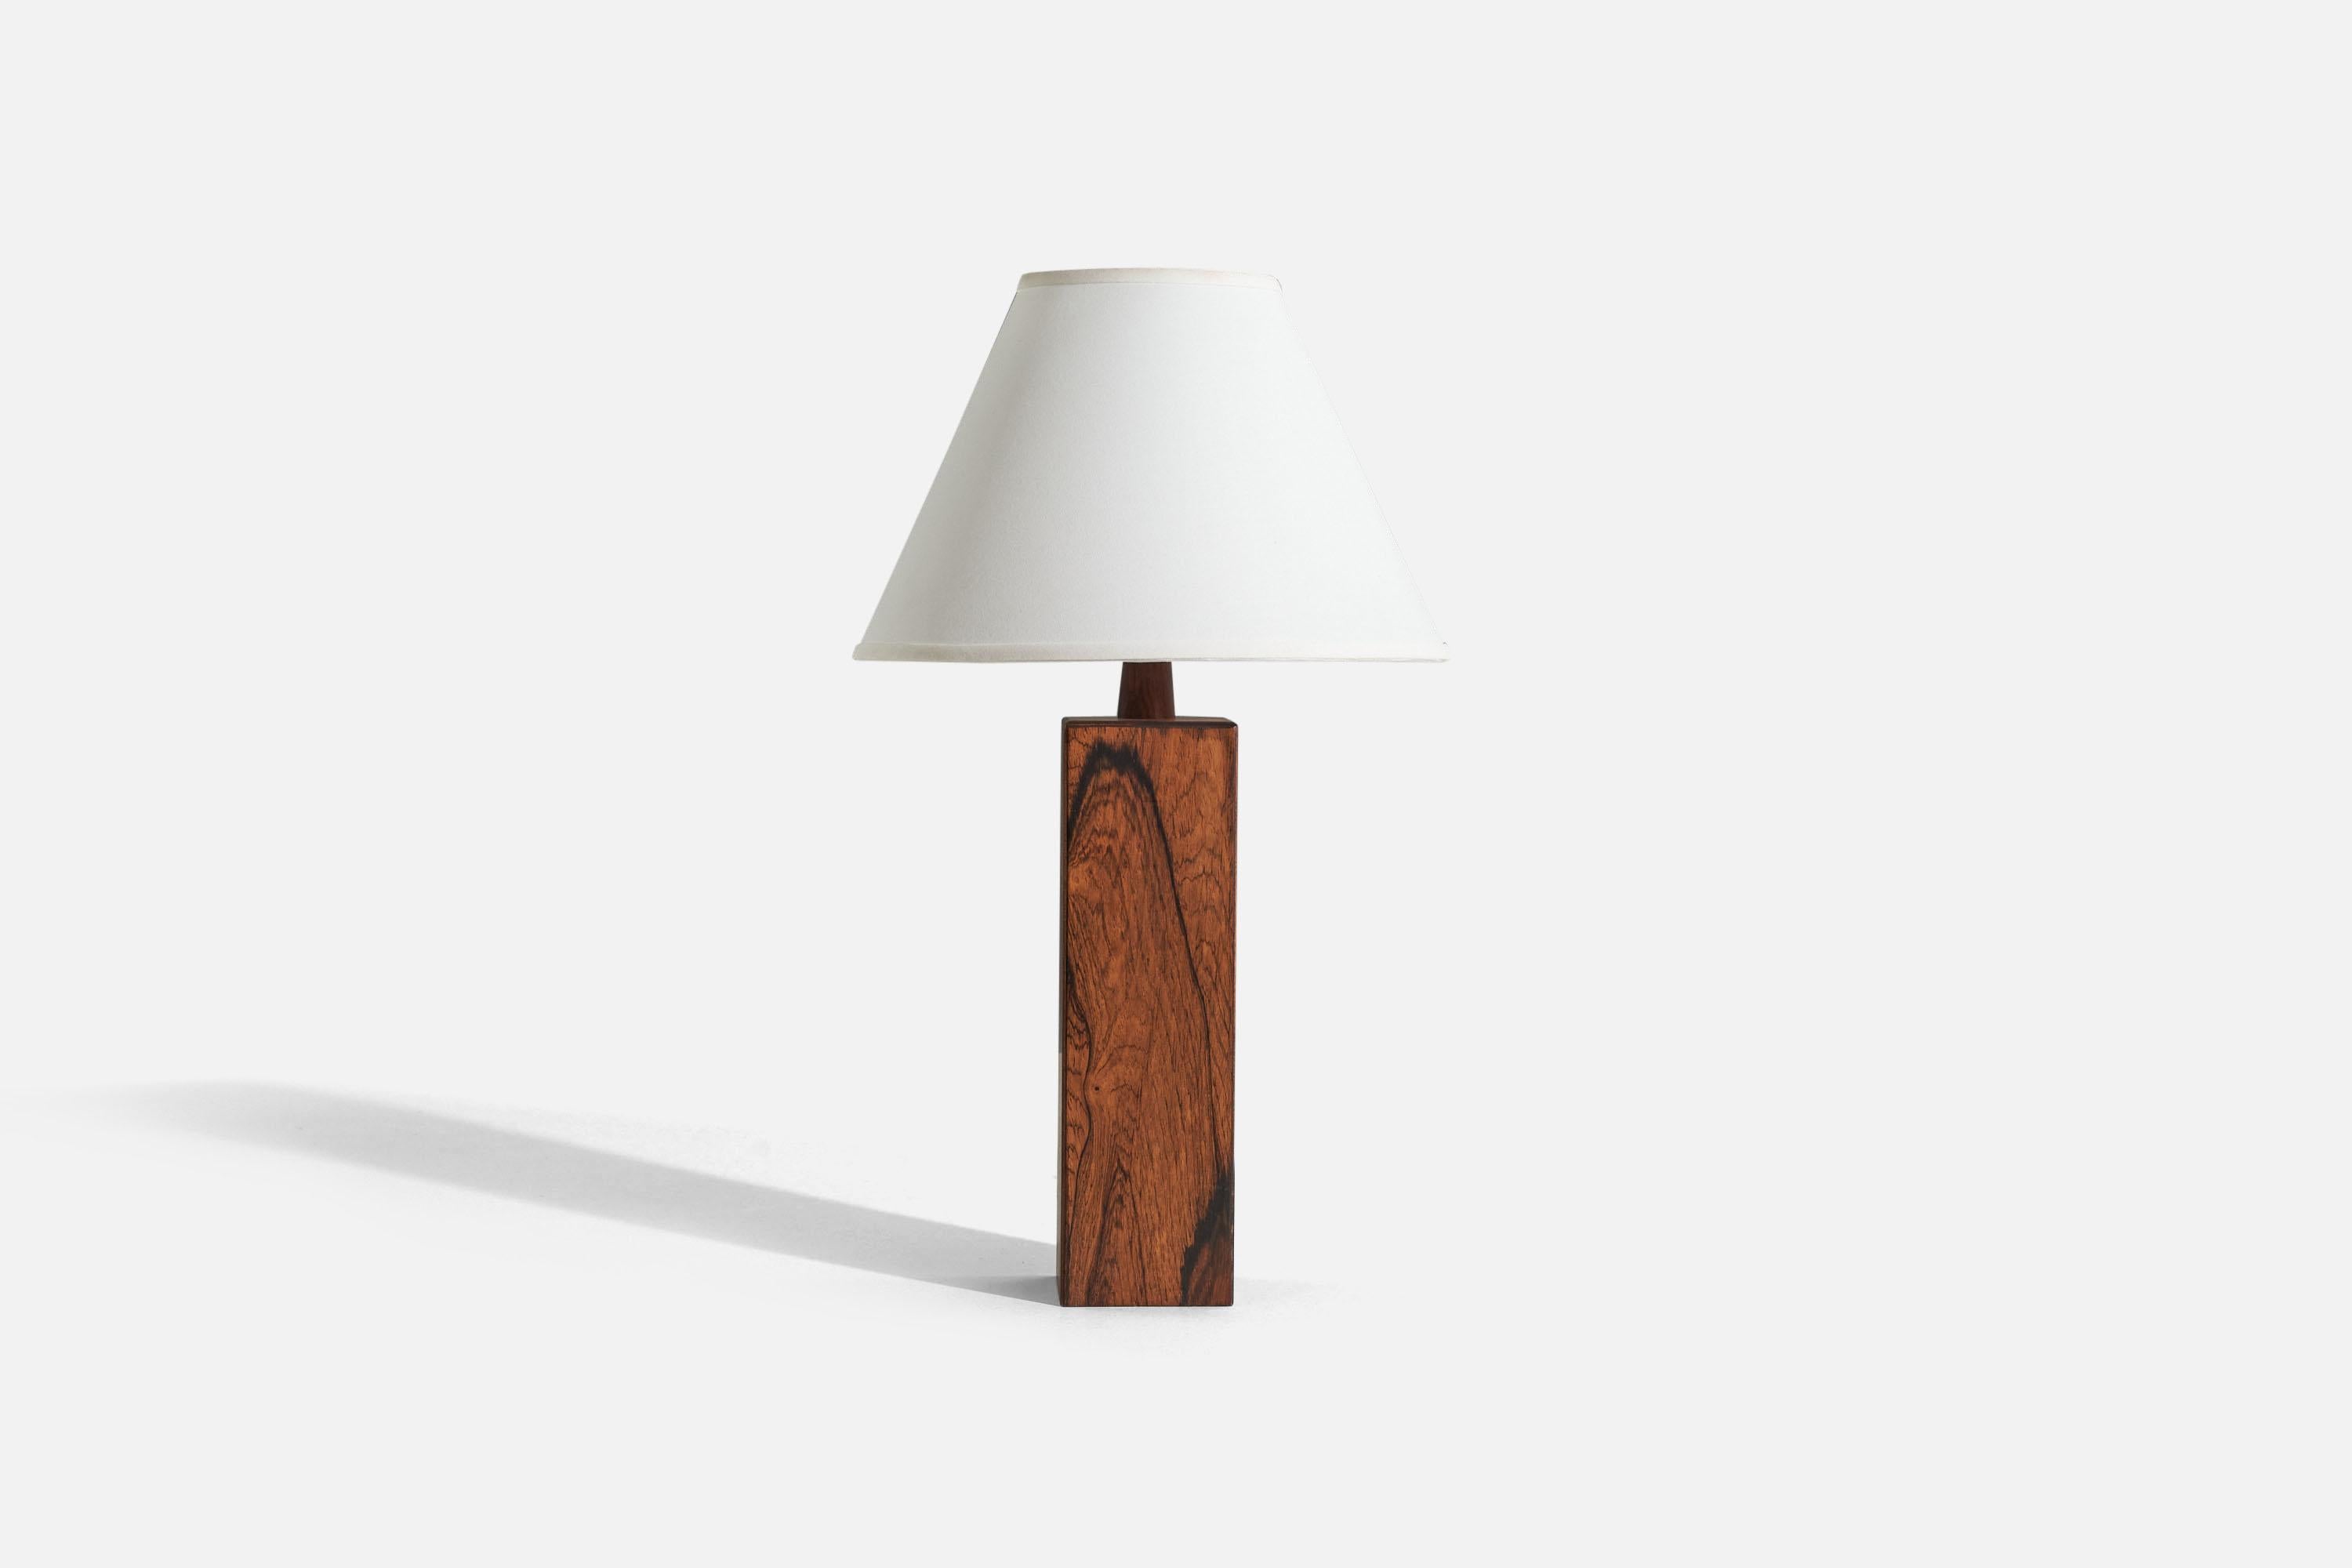 A rosewood table lamp designed and produced in Sweden, c. 1970s.

Sold without lampshade. 
Dimensions of Lamp (inches) : 16.25 x 3.5625 x 3.5625 (H x W x D)
Dimensions of Shade (inches) : 5 x 12.25 x 8.75 (T x B x H)
Dimension of Lamp with